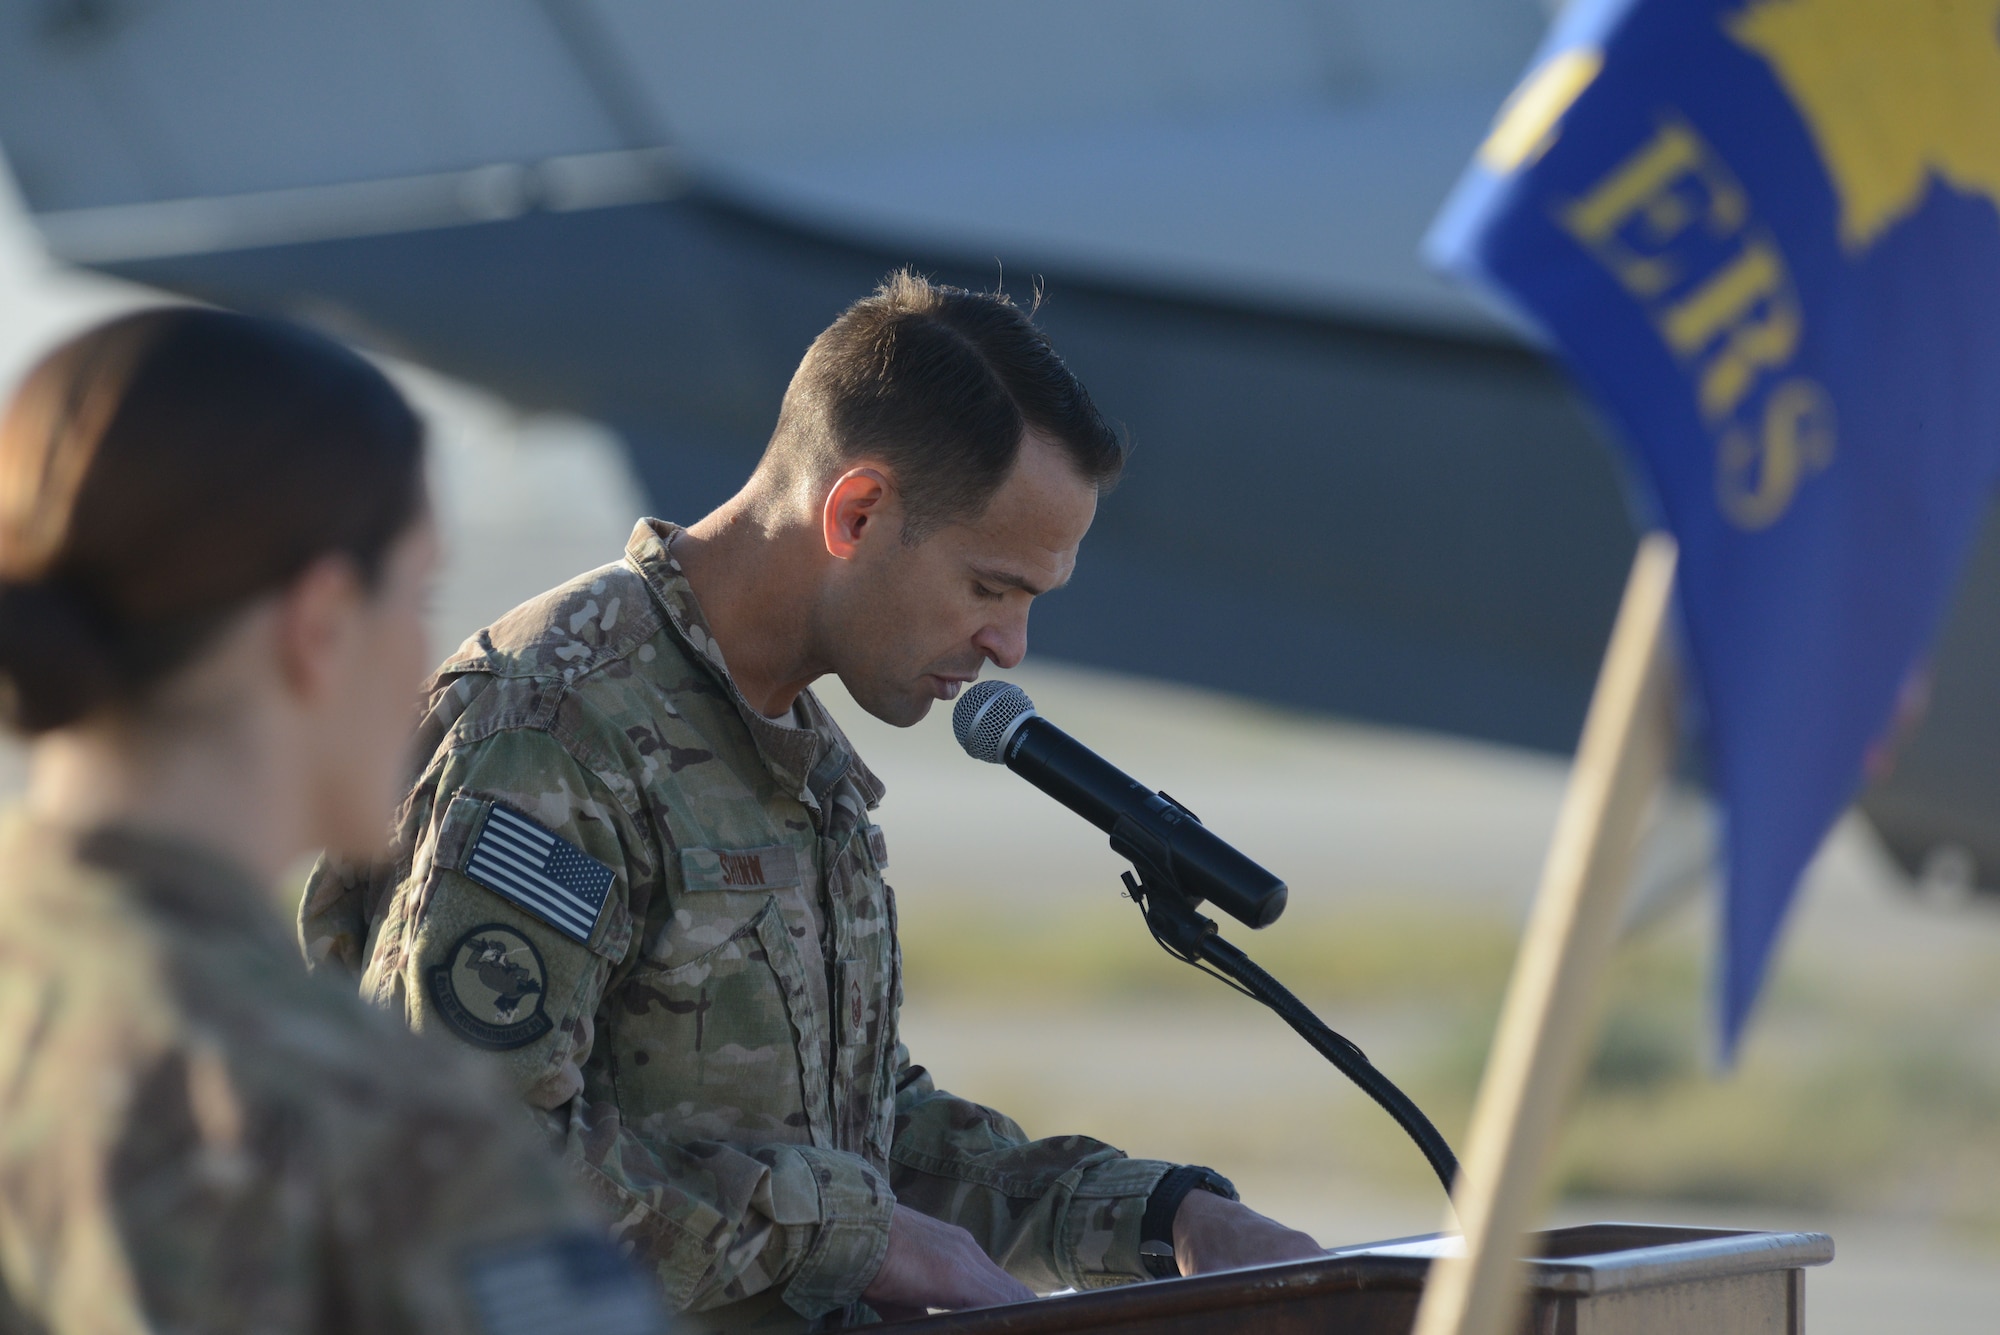 U.S. Air Force Master Sgt. Thomas Shinn, 4th Expeditionary Reconnaissance Squadron superintendent narrates the MC-12W transition of authority ceremony at Bagram Airfield, Afghanistan Oct. 1, 2014. The 4 ERS inactivated and Joint Task Force Thor is now the lead for the MC-12W mission in Afghanistan in Afghanistan. (U.S. Air Force photo by Master Sgt. Cohen A. Young/Released)